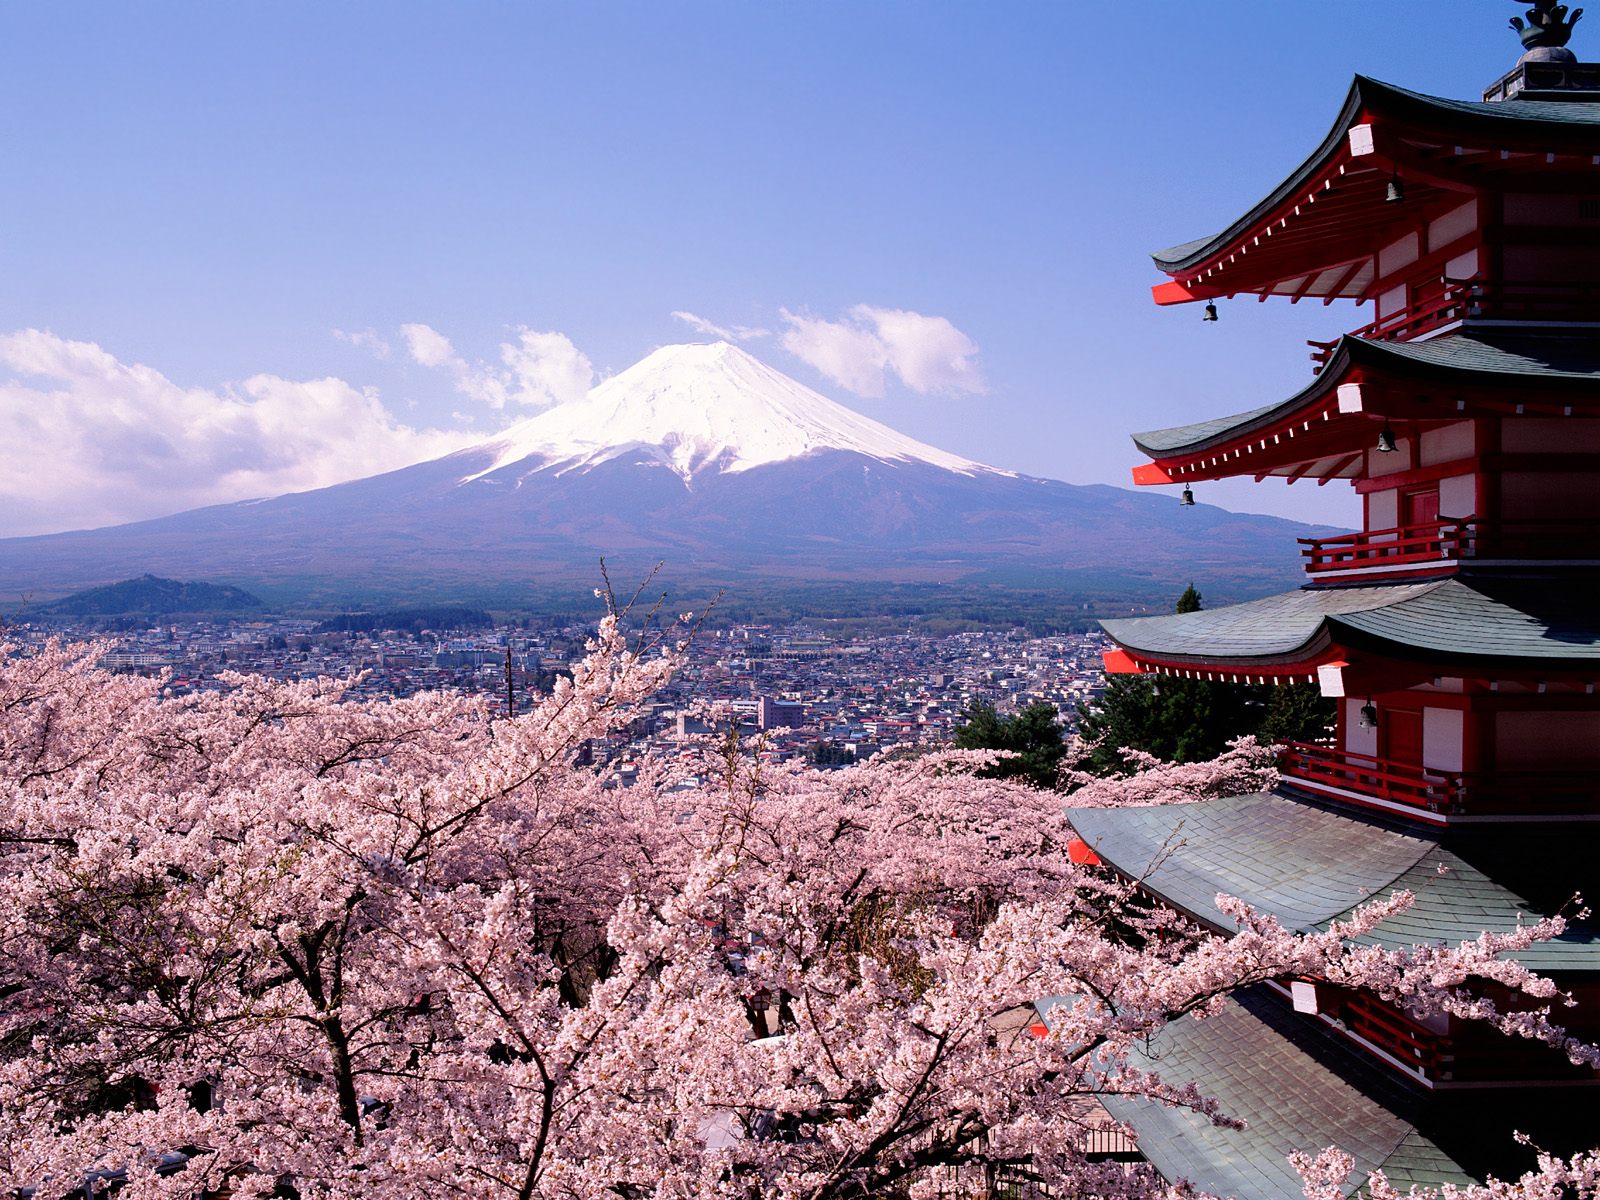 After Tokyo, we climbed Mt. Fuji on a whim (the view at the top was so amazing – see pictures below). We also visited Hiroshima (the museum was excellent, ...